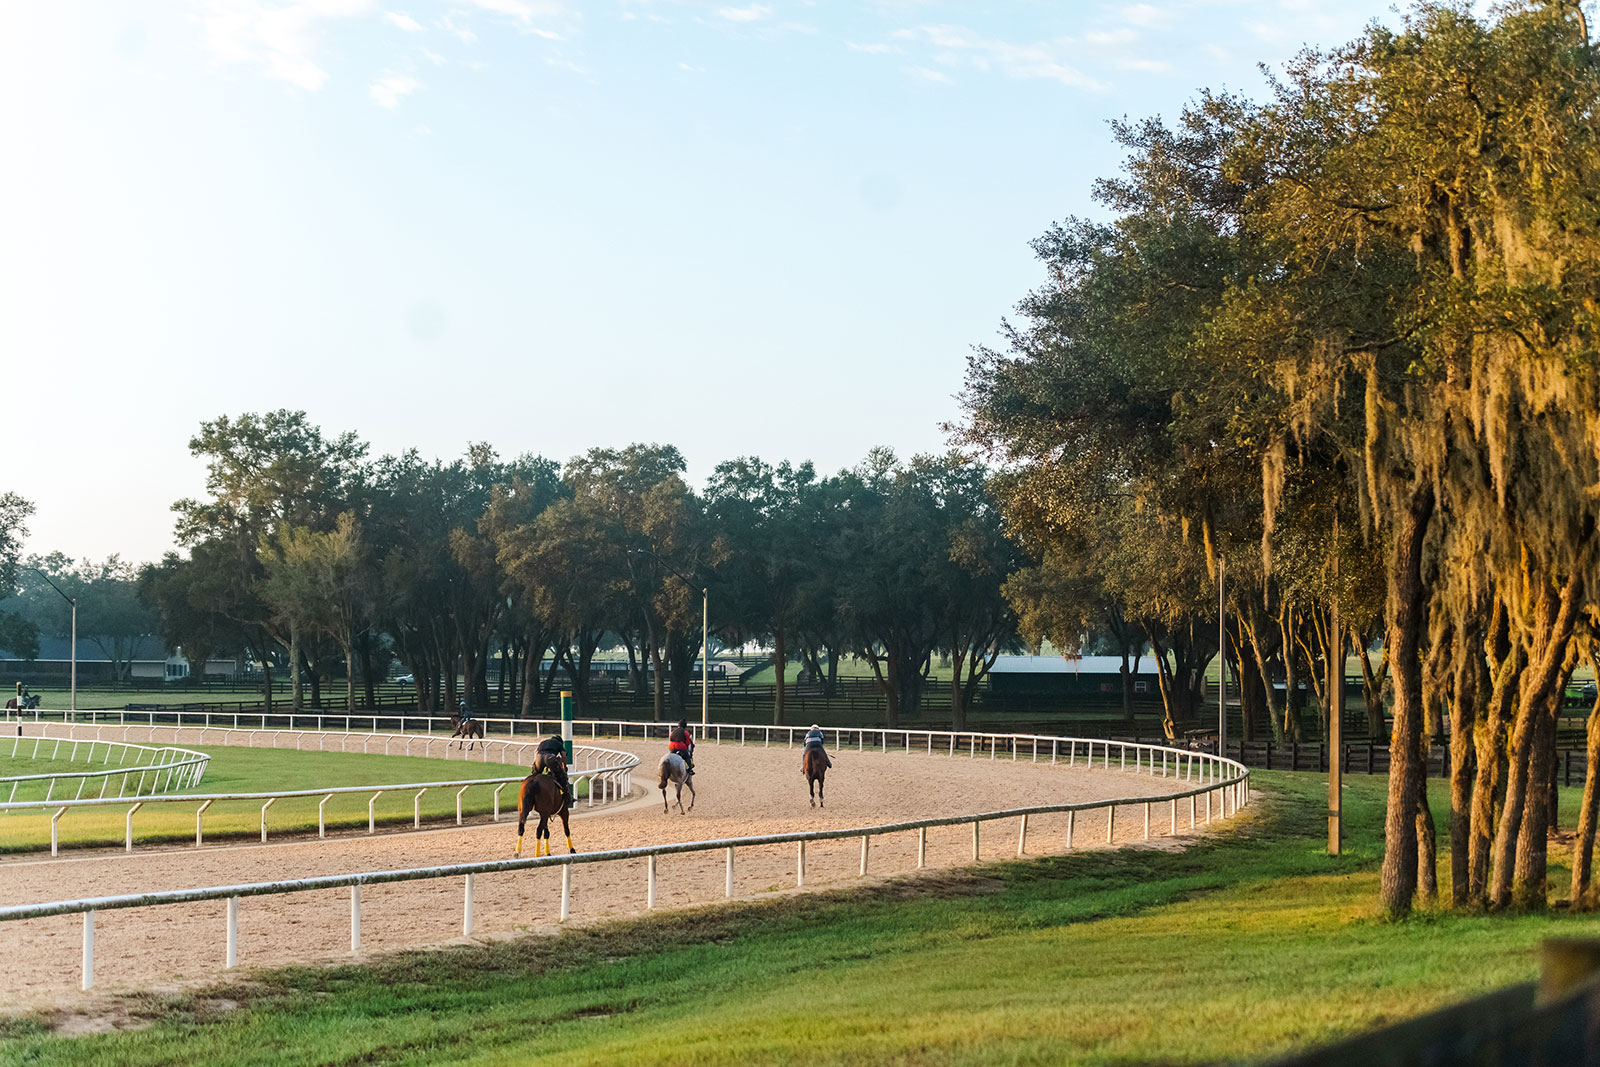 Thoroughbred racehorses school on the dirt track in the early morning at Oak Ridge Training Center